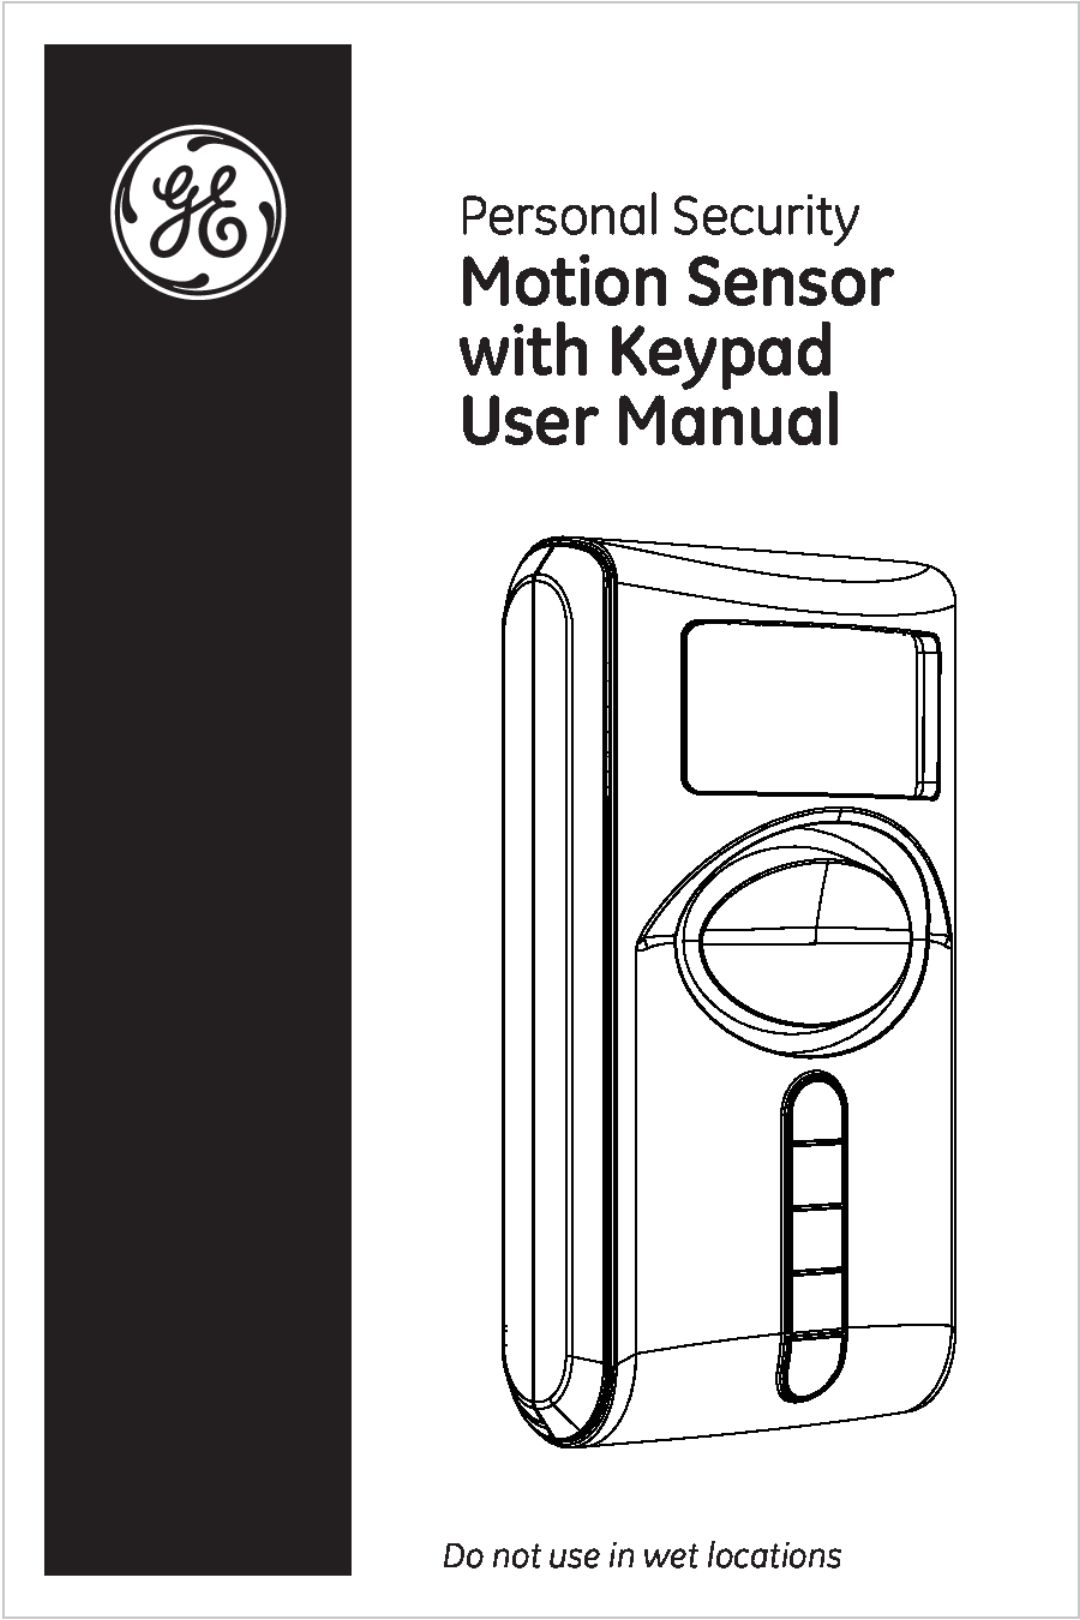 Jasco 51209 user manual with Keypad, Motion Sensor, Personal Security, Do not use in wet locations 